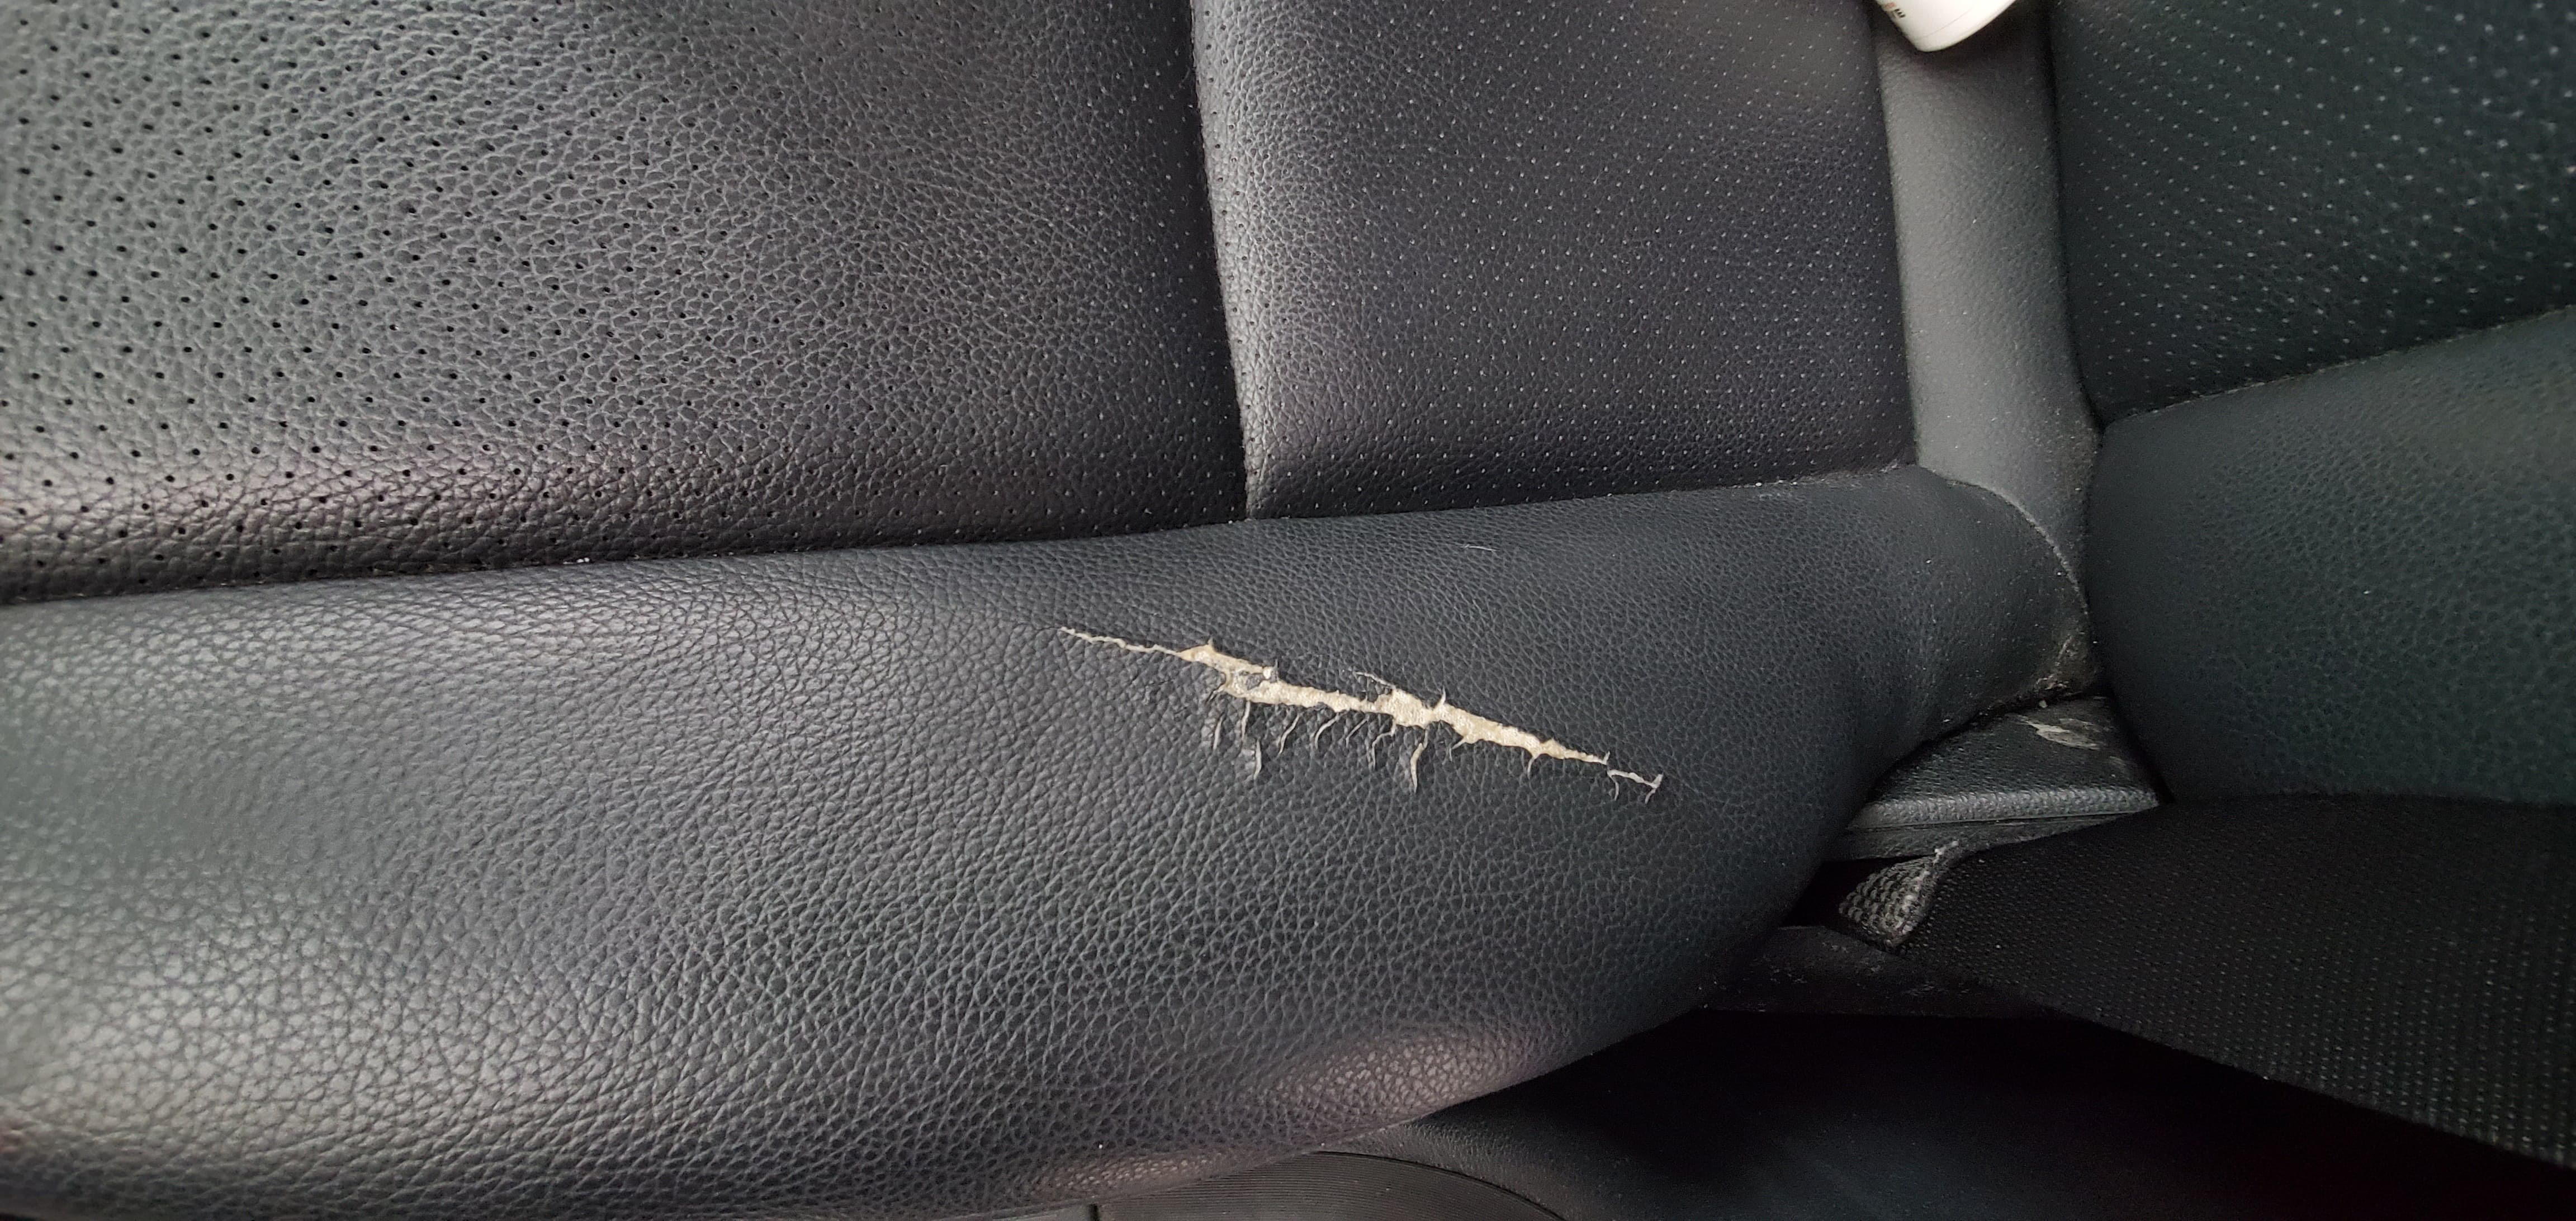 How To Repair A Leather Car Seat - How To Fix A Small Hole In Leather Seat